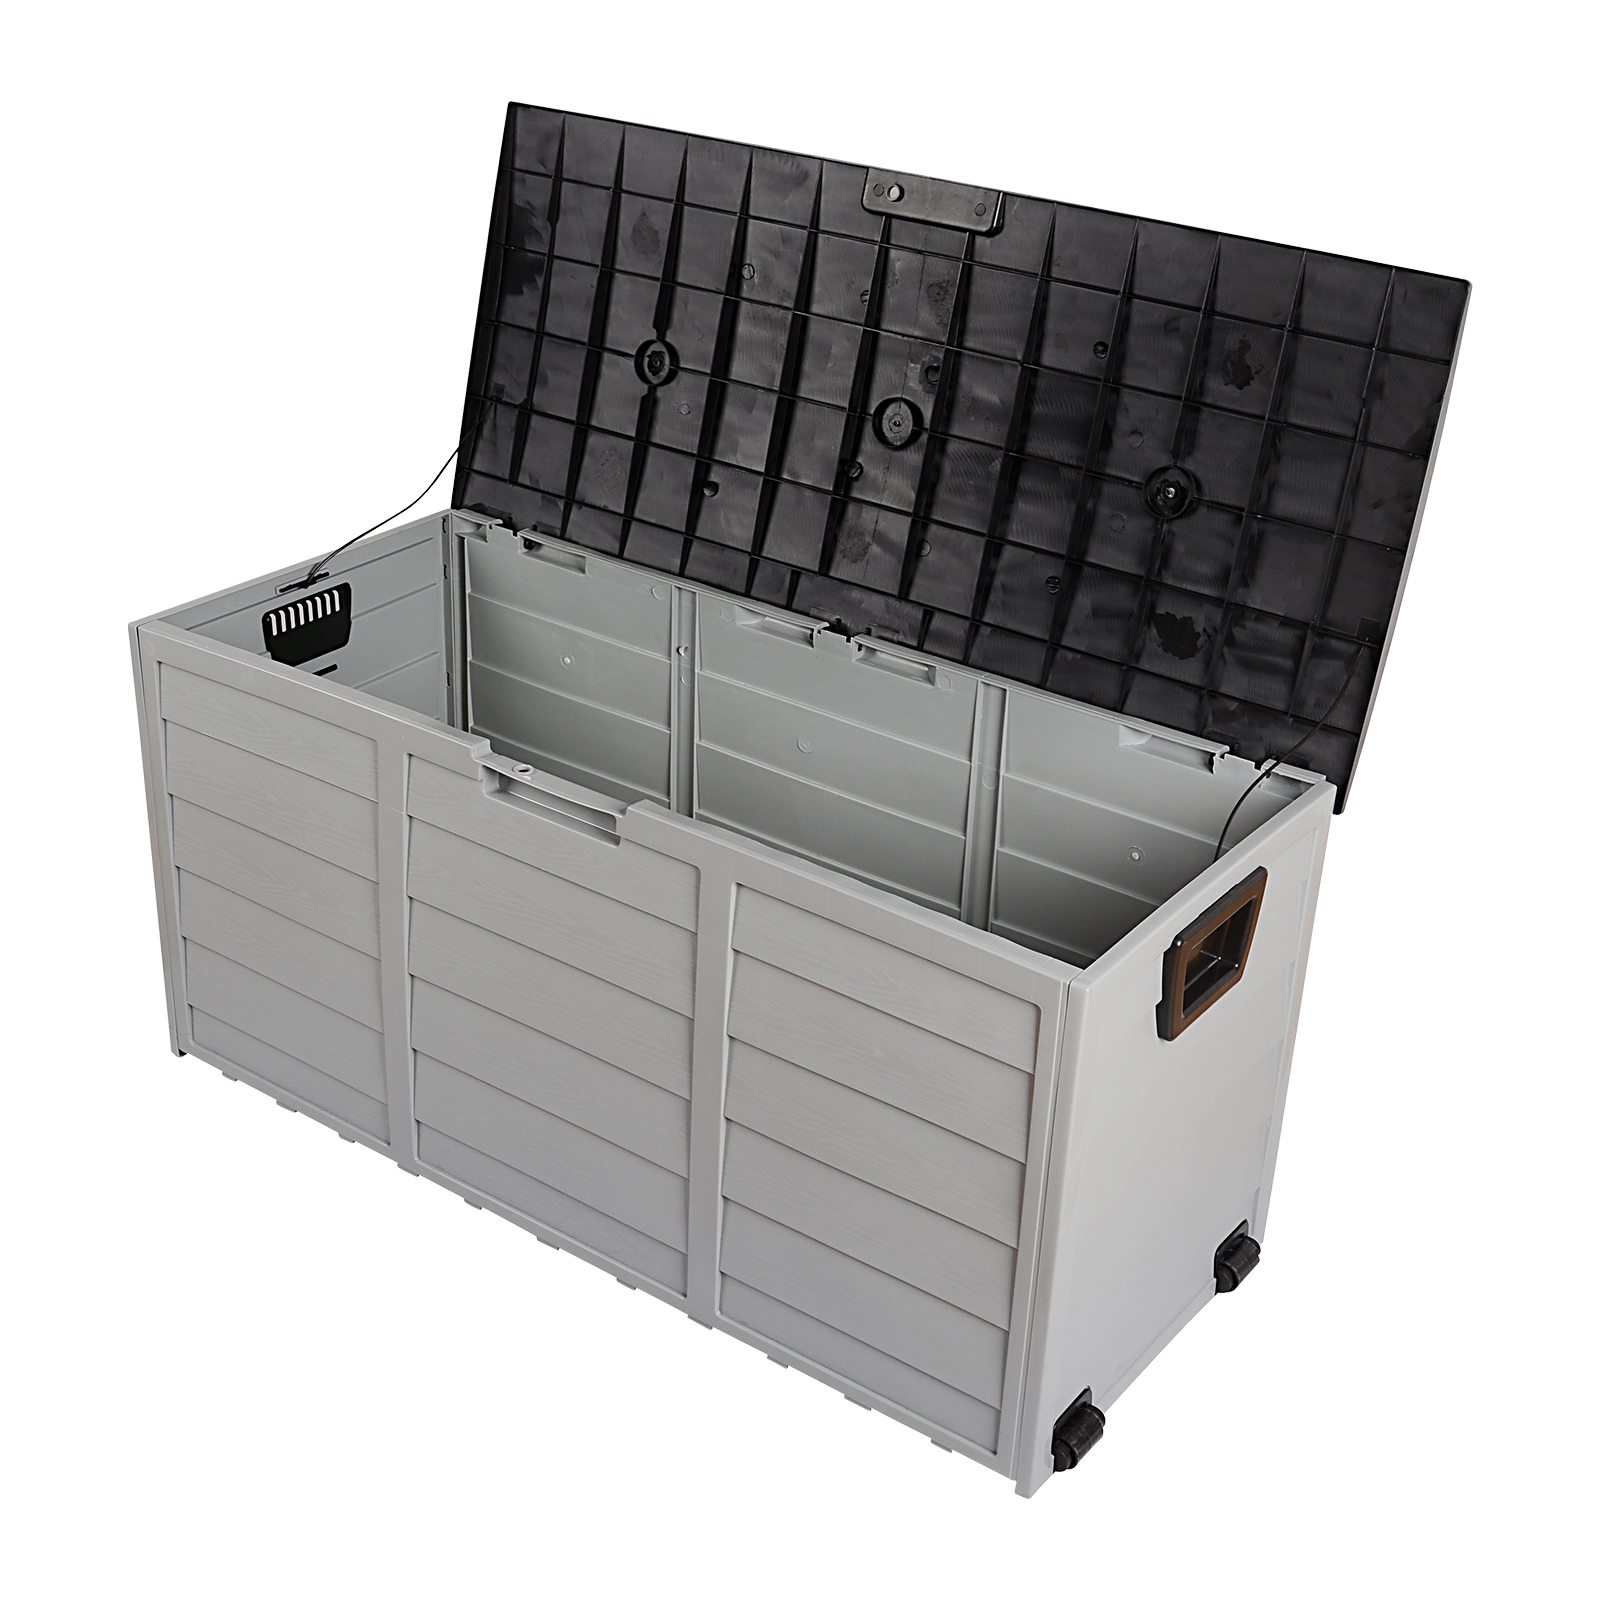 Great Deals 75gal 260L Outdoor Garden Plastic Storage Deck Box Chest Tools Cushions Toys Lockable Seat